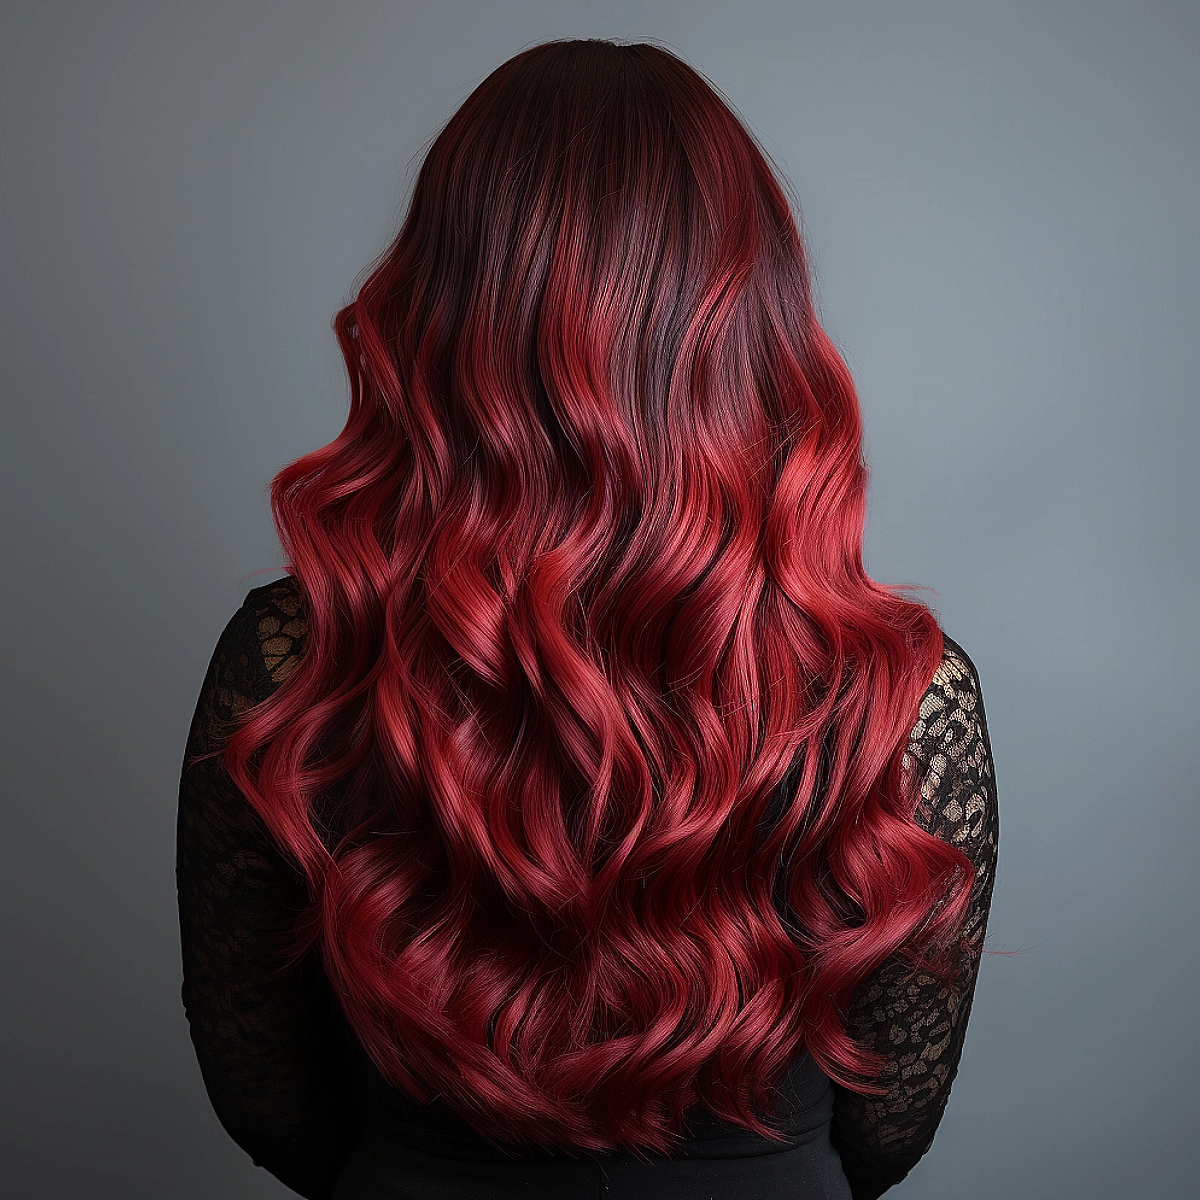 black-to-dark-red-long-curly-hair-how-to-do-ombre-hair-black